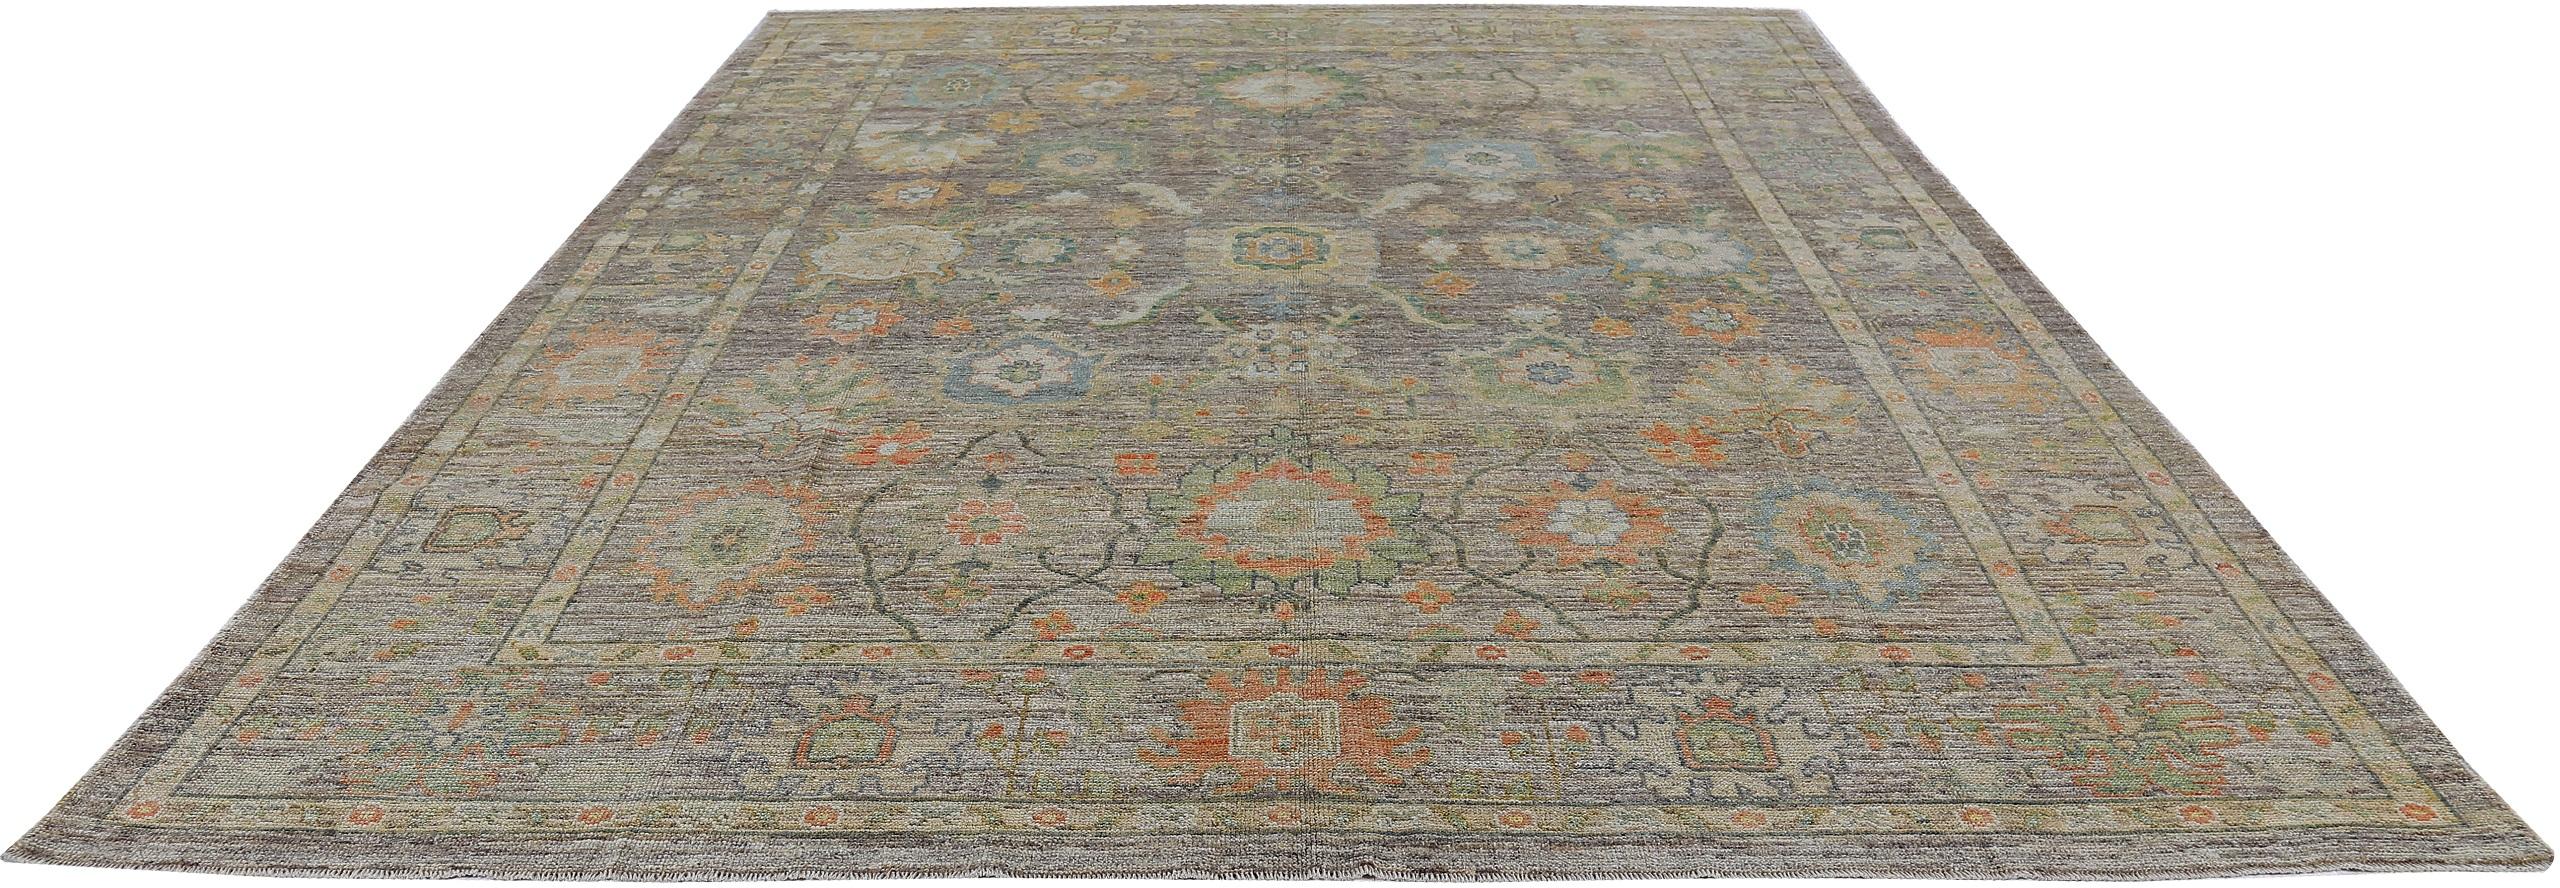 Hand-Knotted Nazmiyal Collection Green Modern Turkish Oushak Rug 10 ft 7 in x 13 ft 5 in